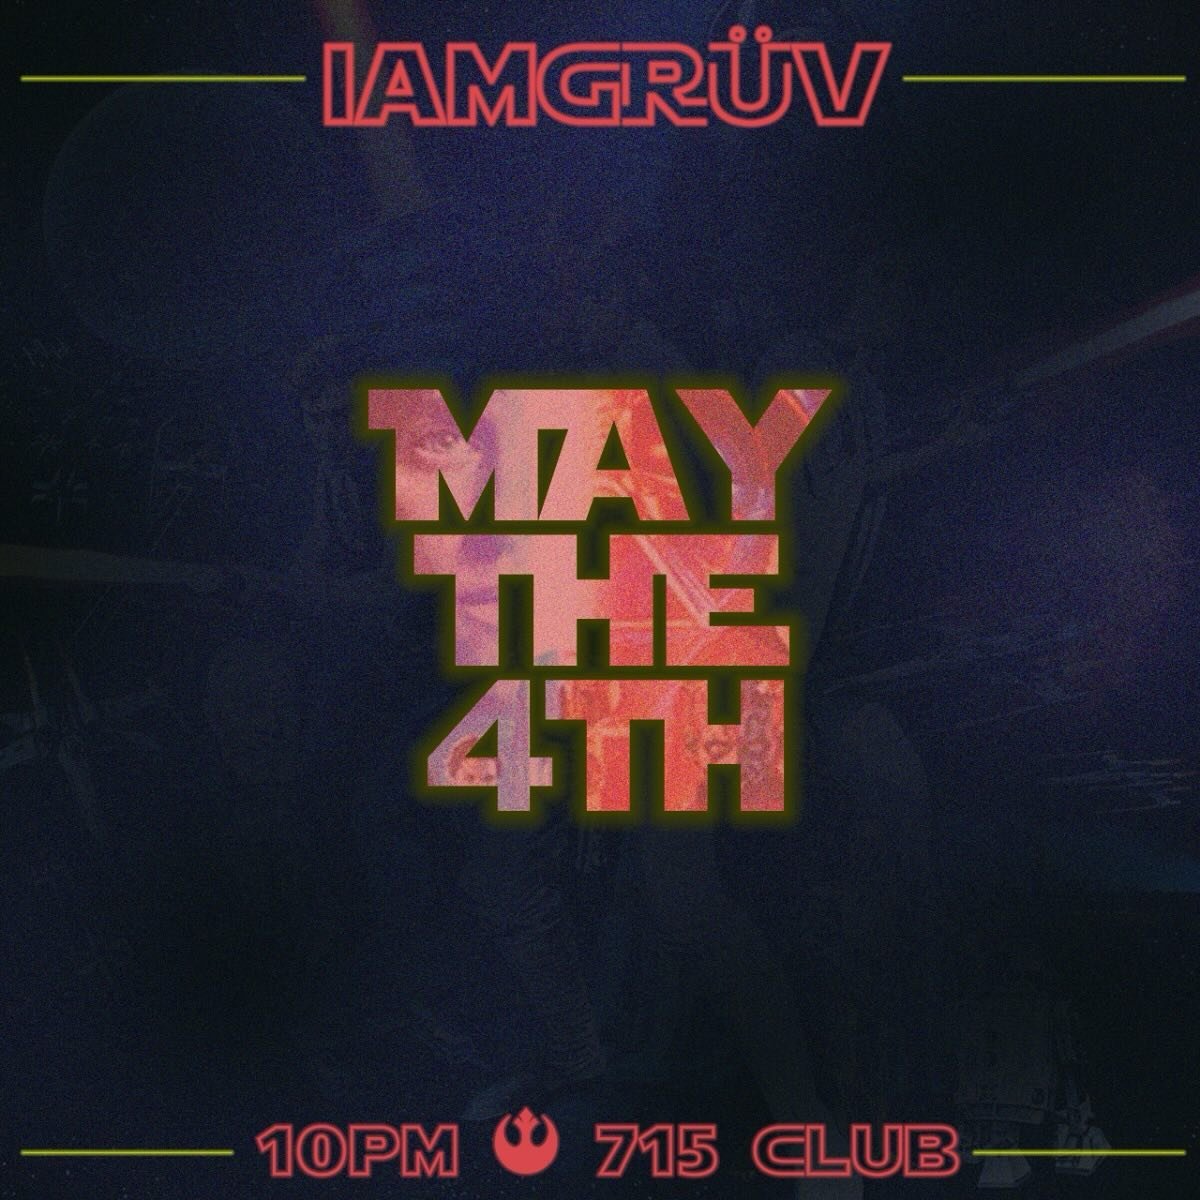 &ldquo;Adventure? Excitement? A Jedi craves not these things.&rdquo; Well good thing we&rsquo;re not Jedis. We like to party and we love adventure and excitement. Sith AF. Come get down with @iamgruv tonight and we&rsquo;ll have the first 20 mins Epi